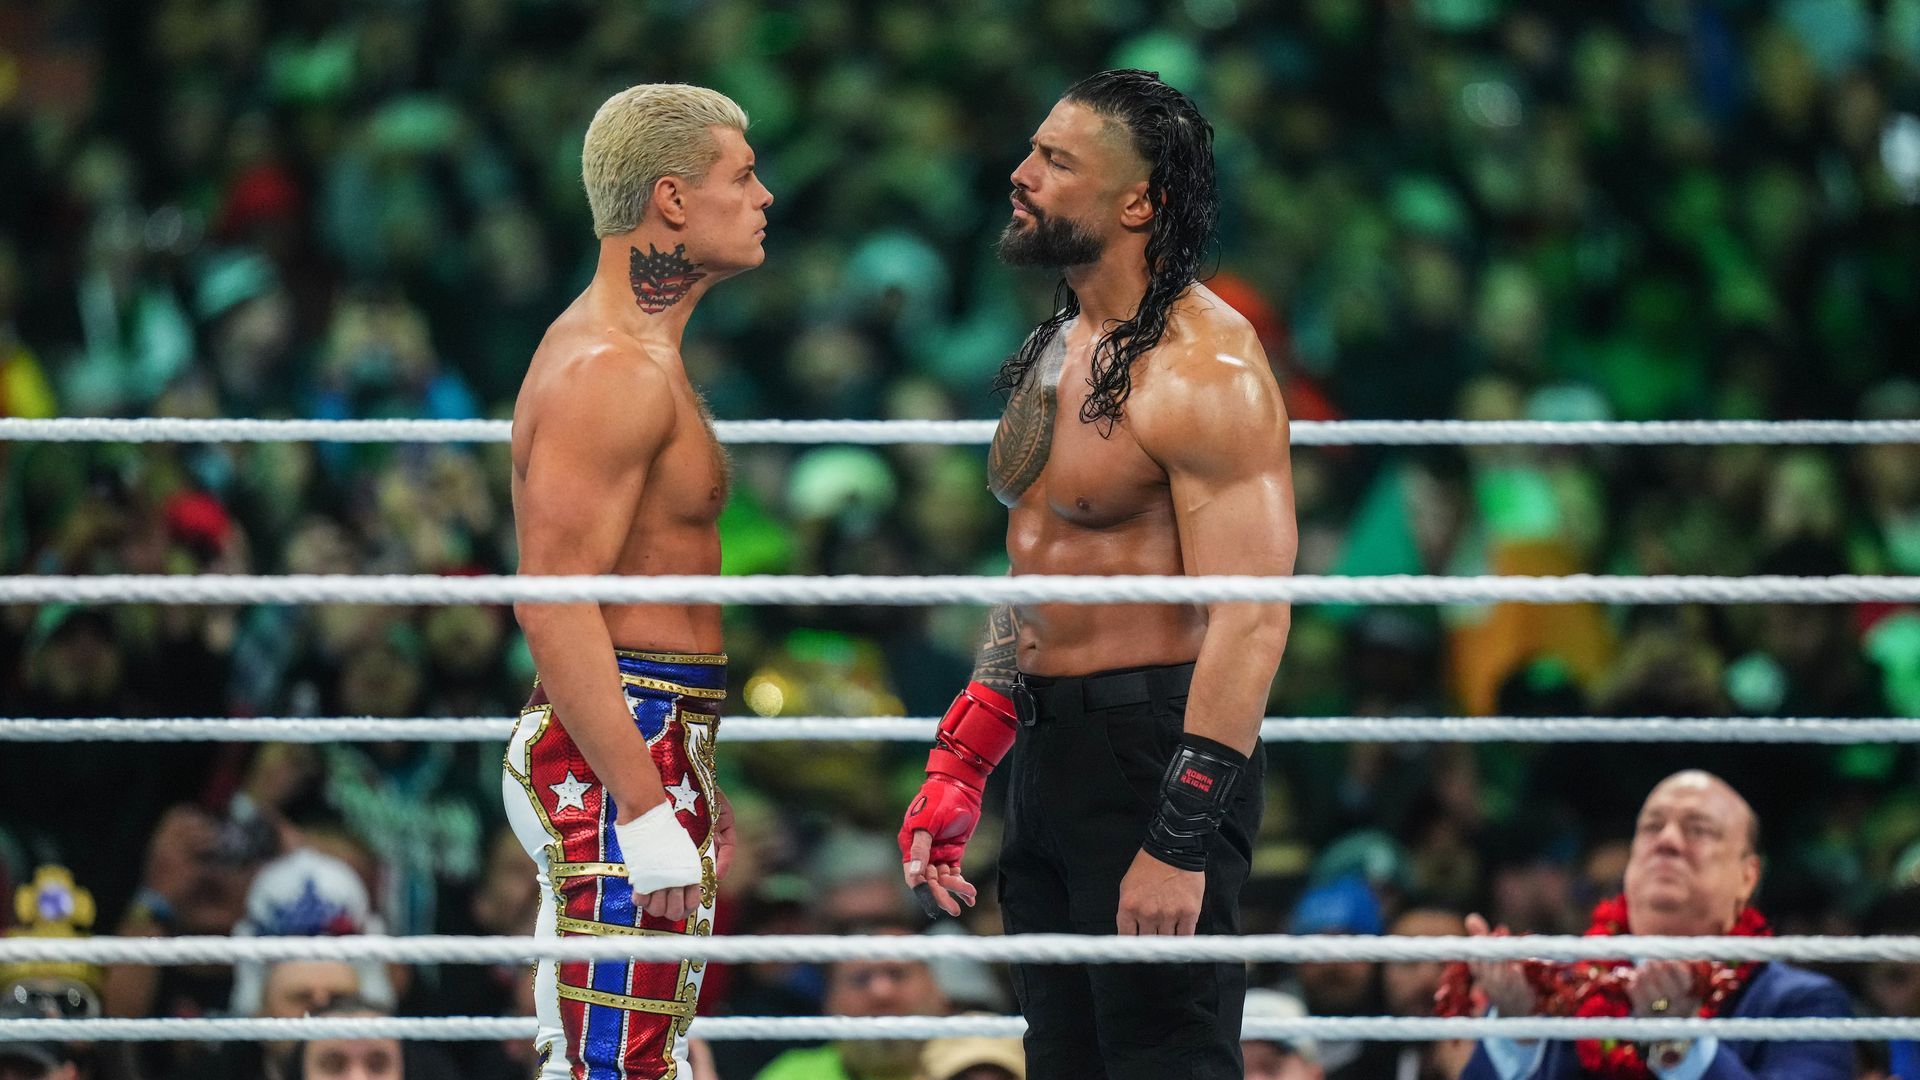 Cody Rhodes and Roman Reigns face off. 